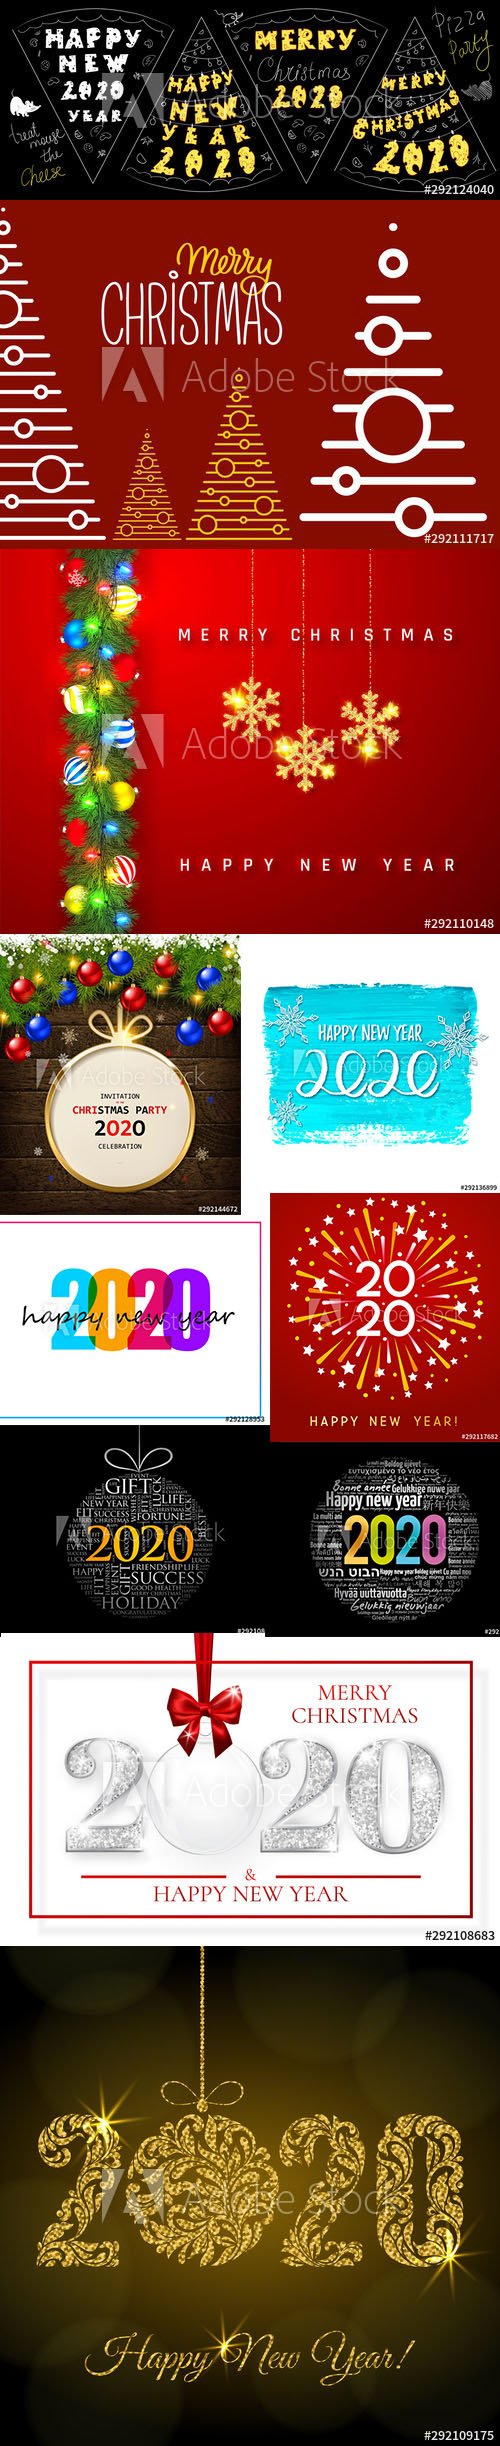 Merry Christmas and Happy New Year 2020 Illustrations Set 6